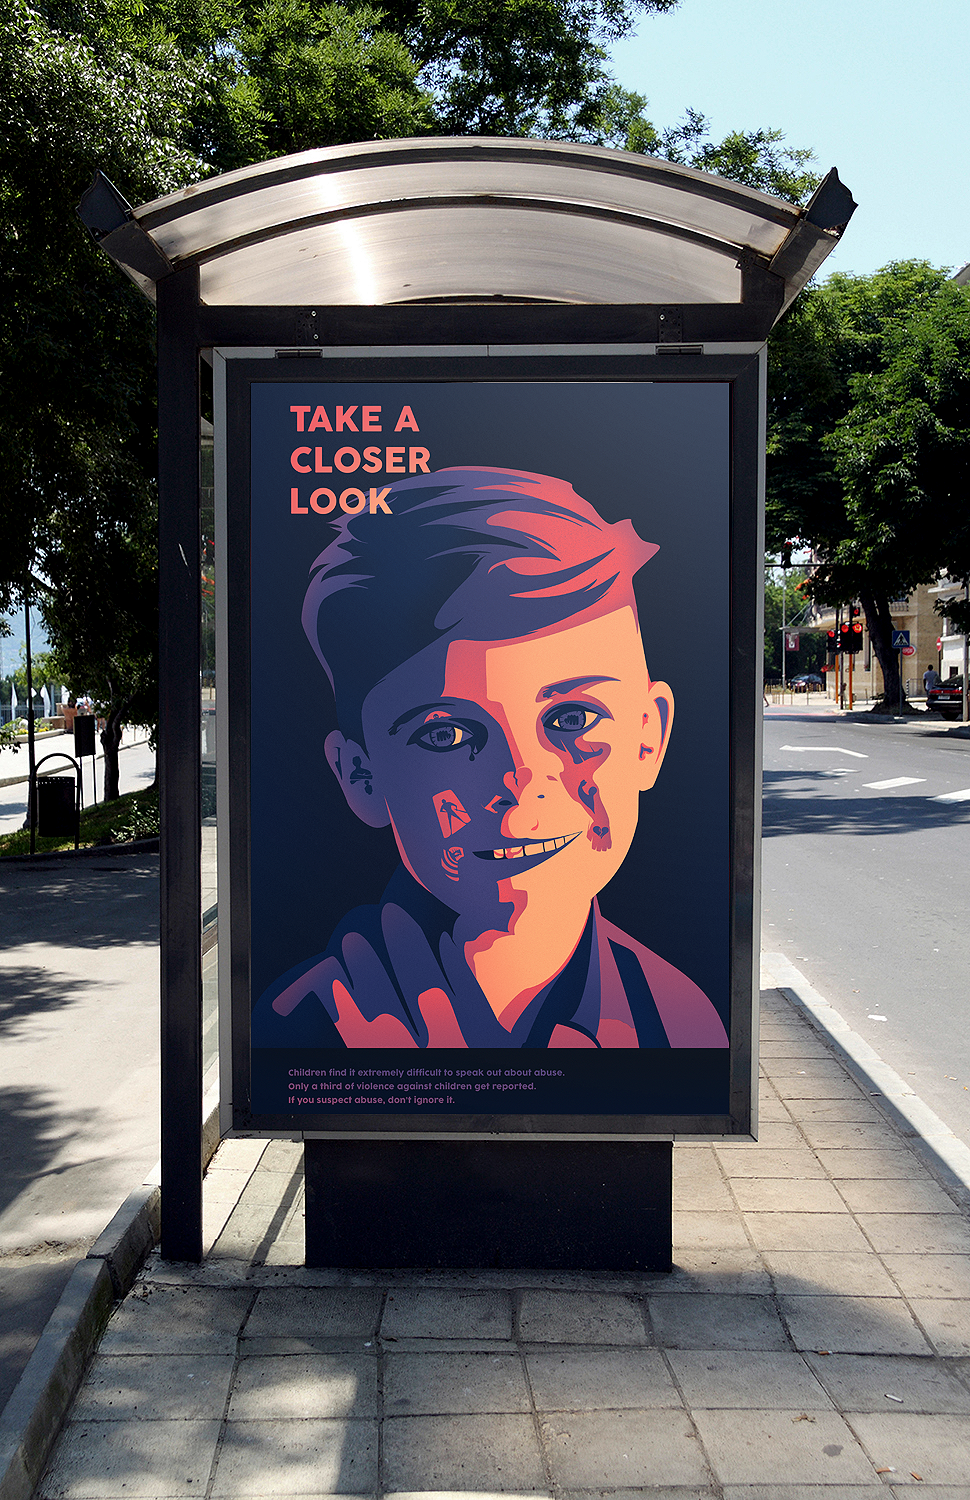 creative consience Entry take Closer look child abuse violence Against children poster ad campaign Illustrative warm